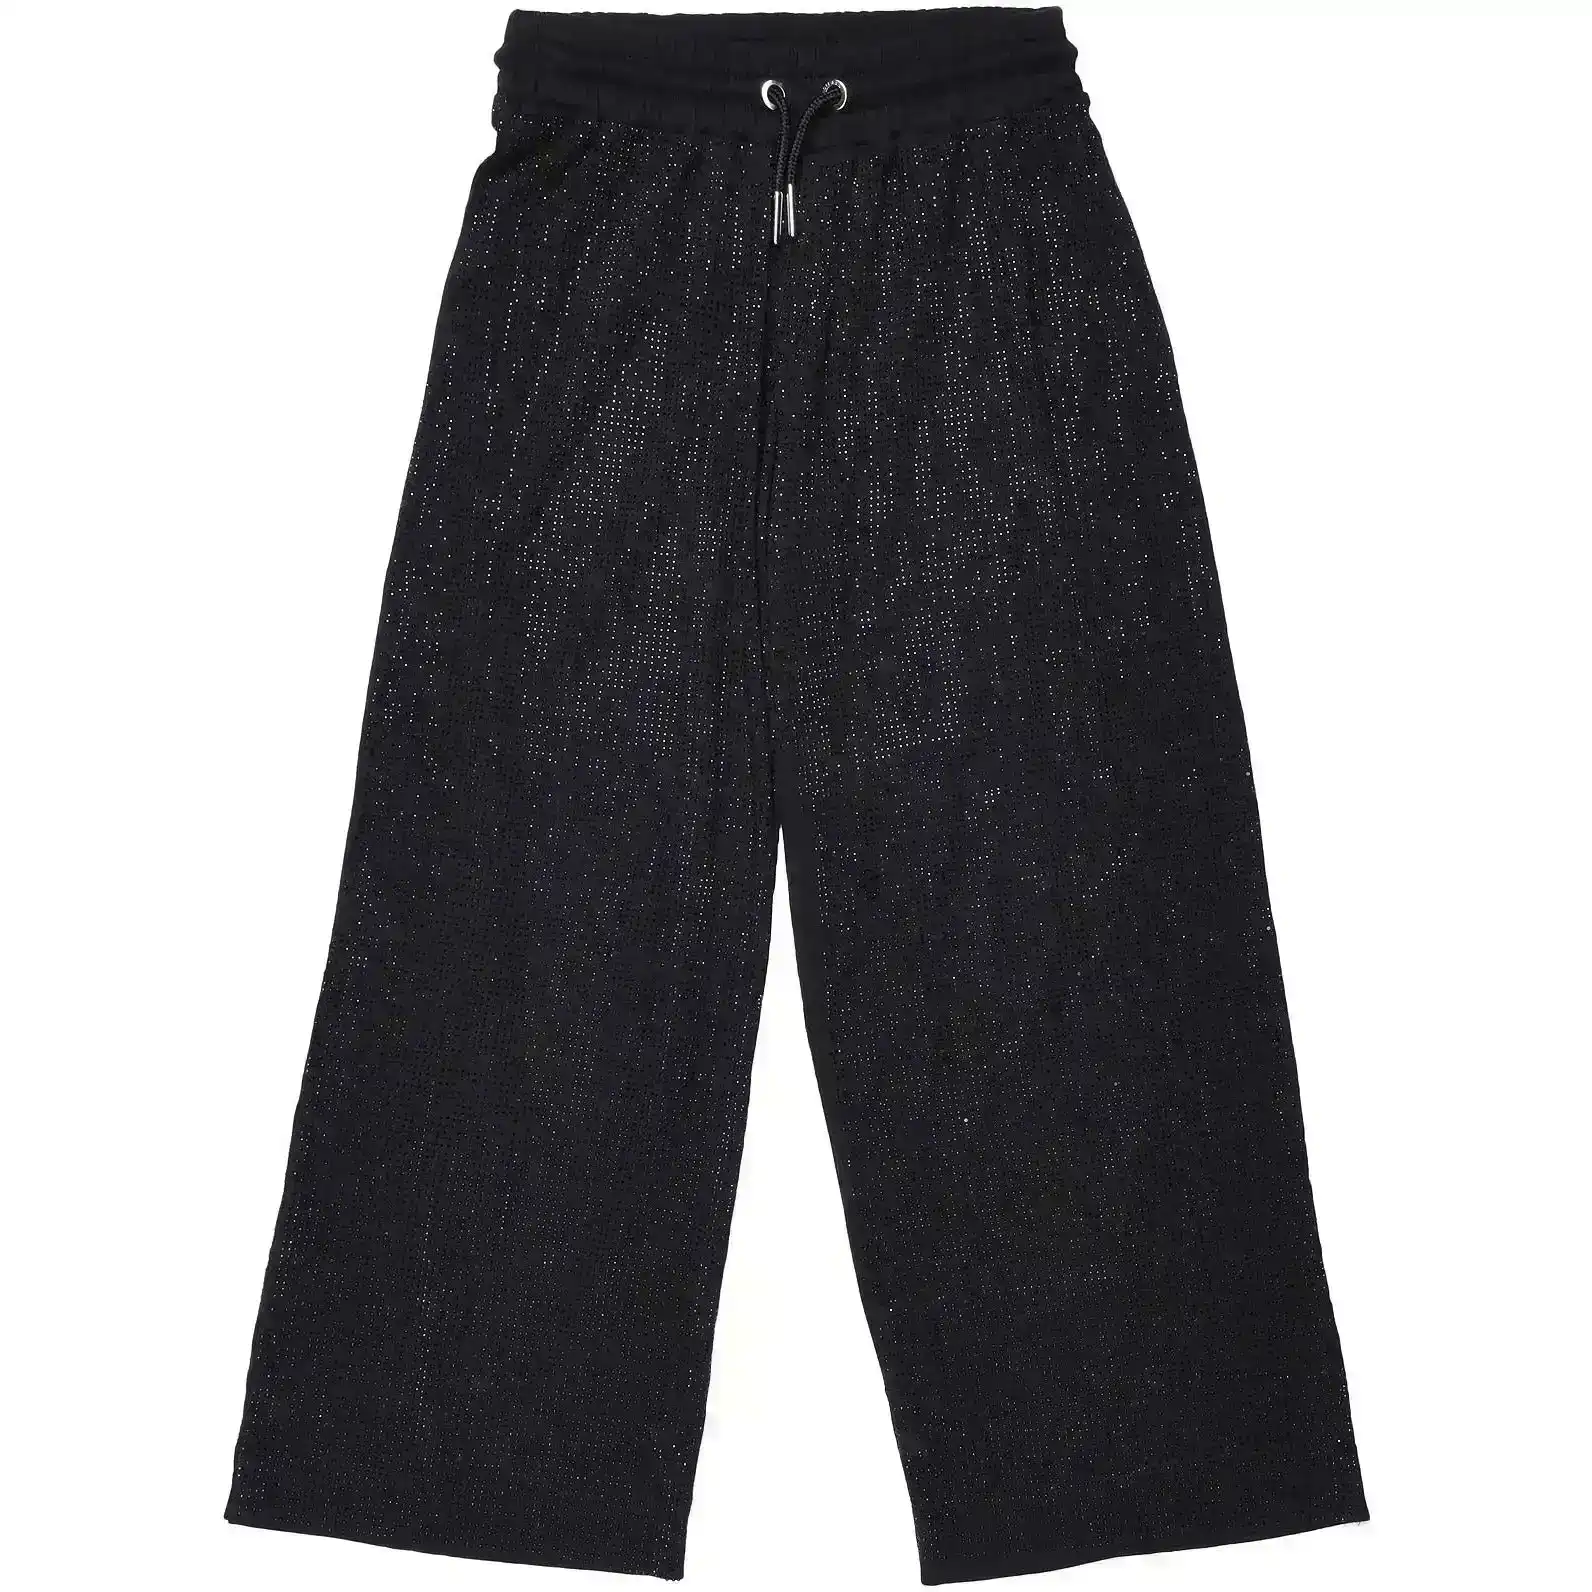 Diesel Girls Black Sparkly Joggers with Elasticated Waist